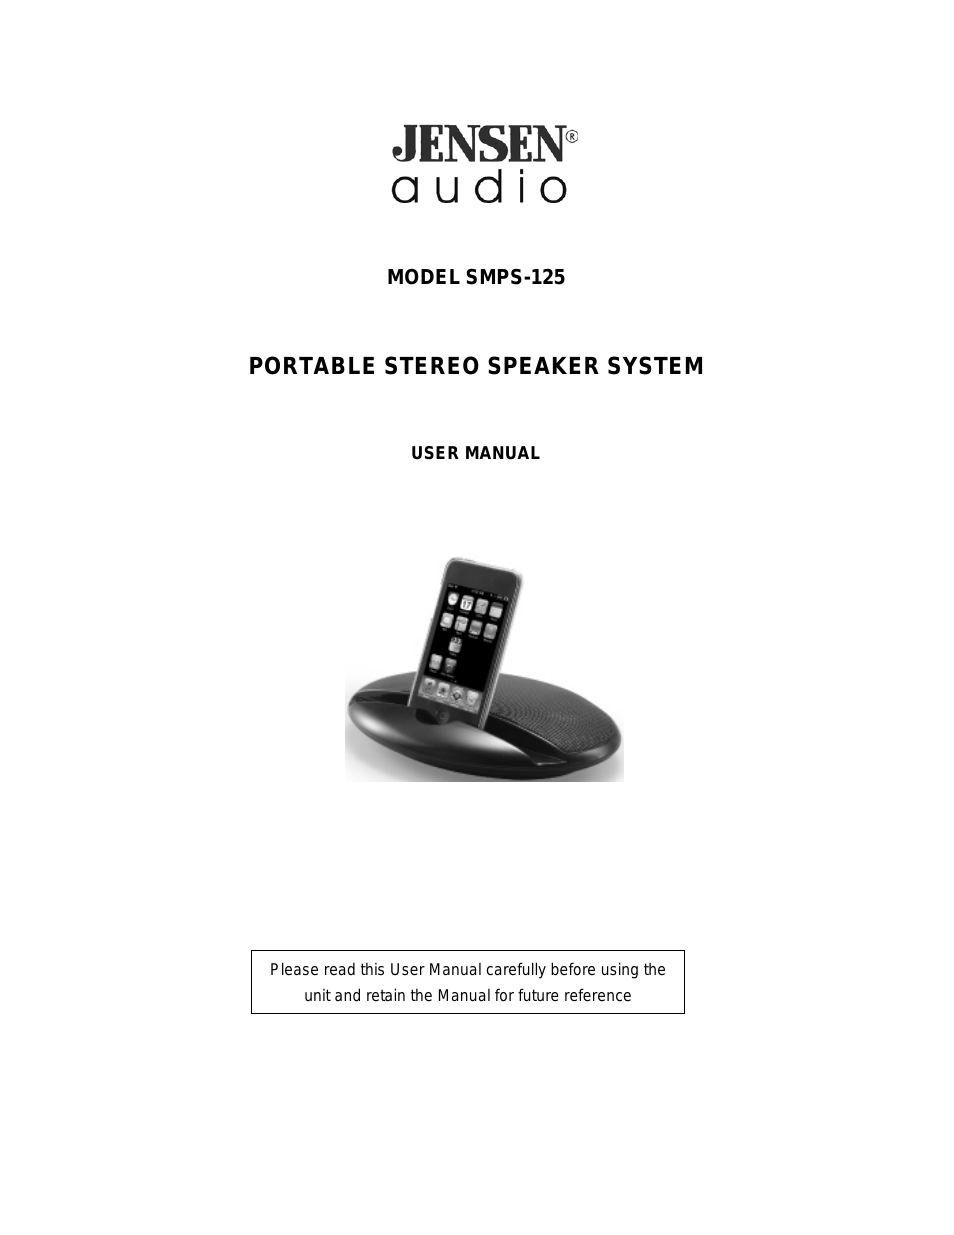 PORTABLE STEREO SPEAKER SYSTEM SMPS-125 (Page 1)